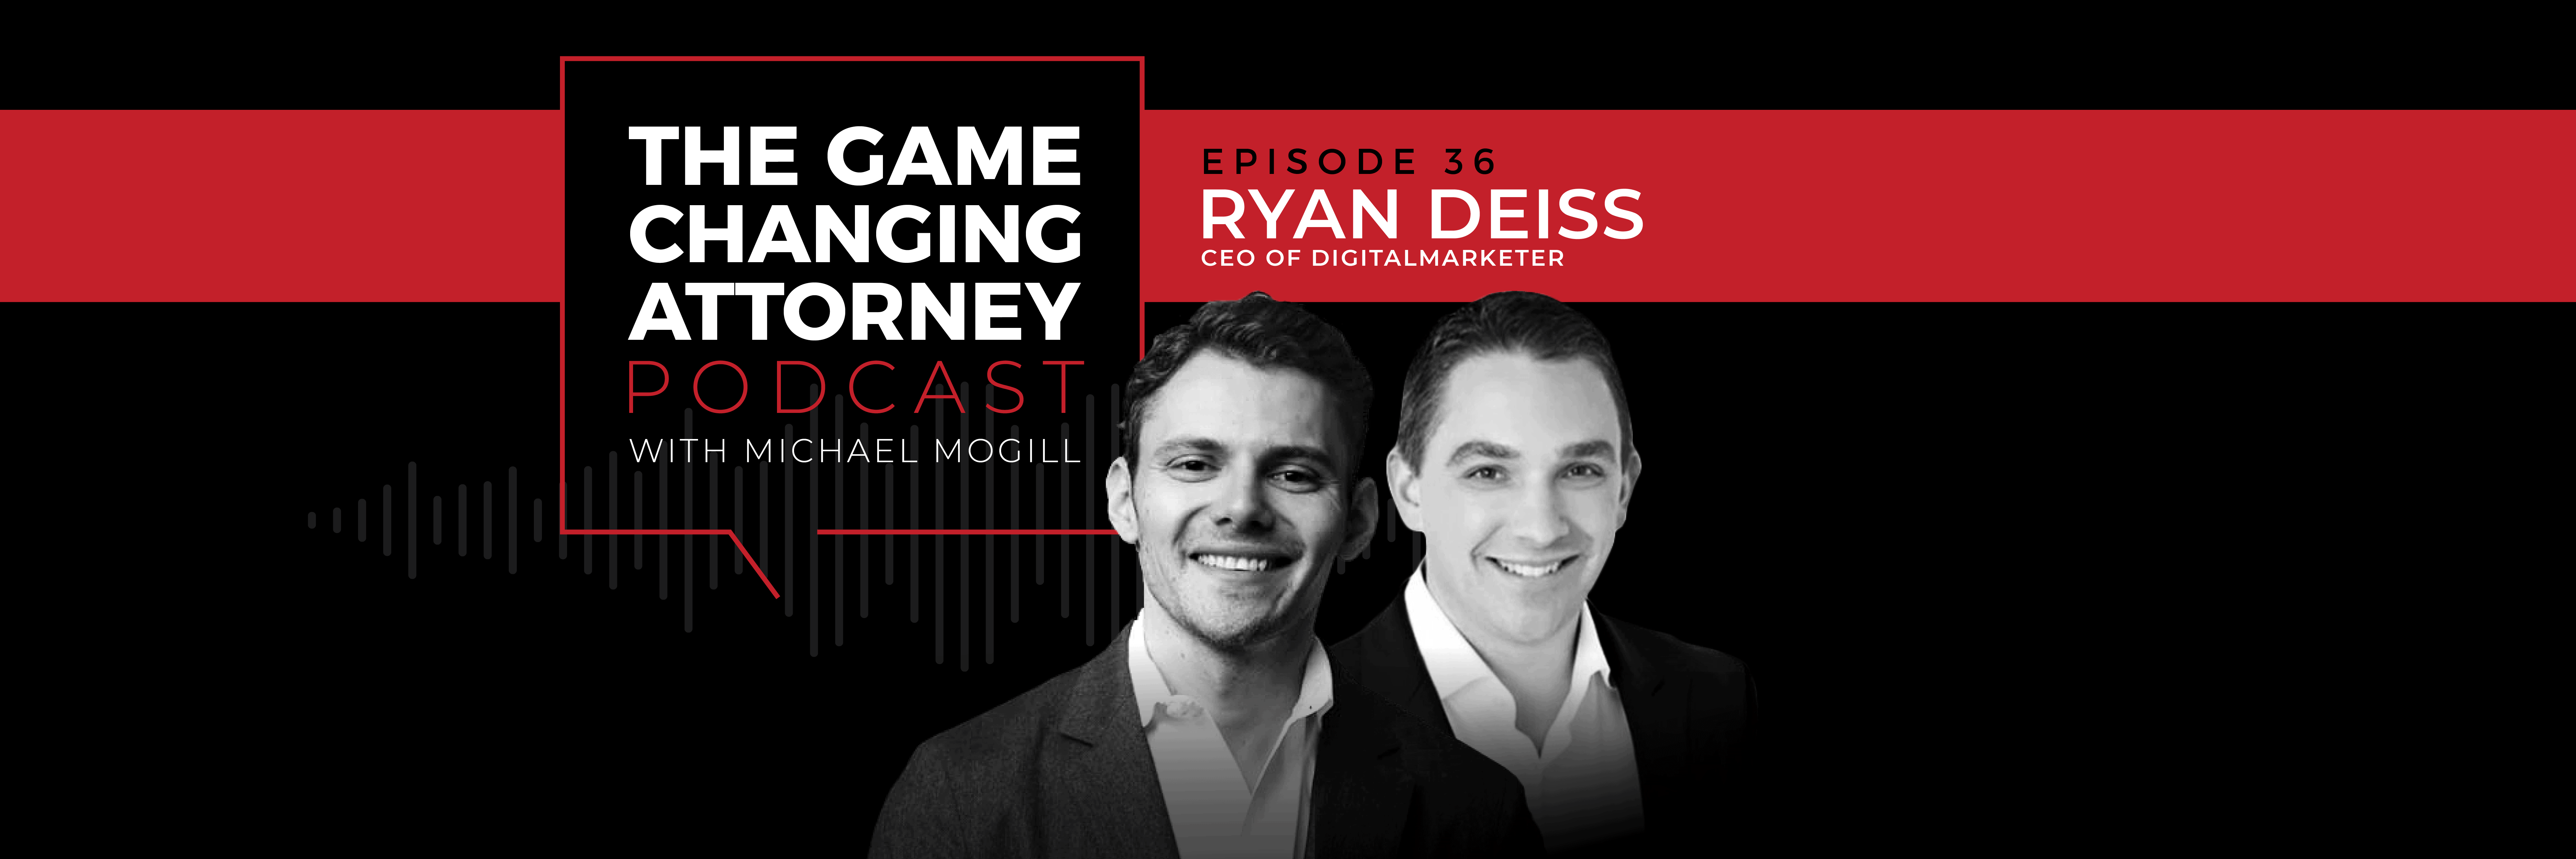 Ryan Deiss - The Game Changing Attorney Podcast - Desktop